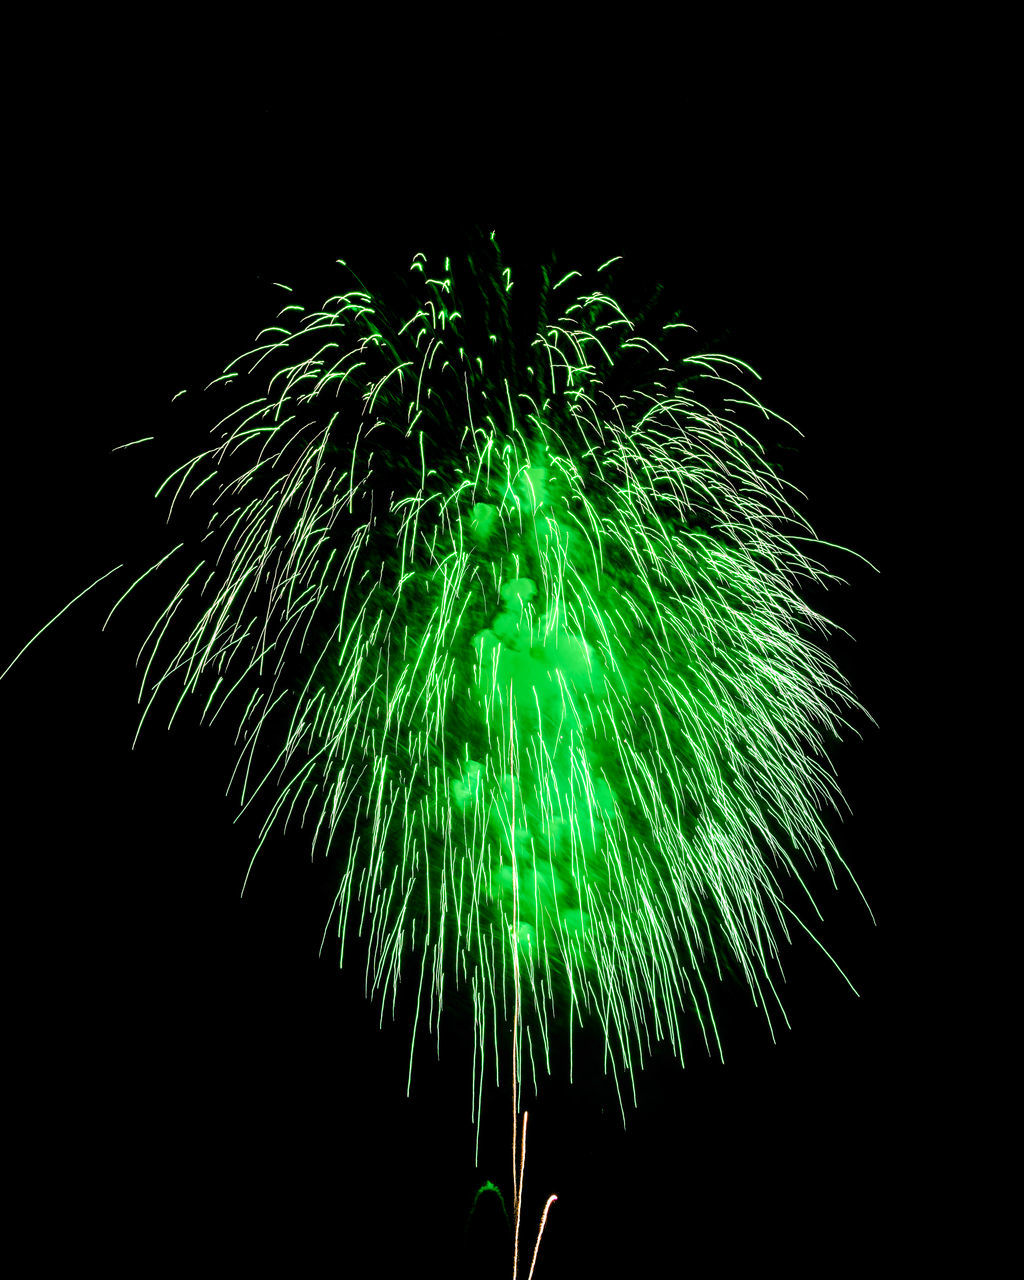 fireworks, motion, night, black background, illuminated, green, celebration, exploding, firework display, recreation, no people, glowing, event, nature, arts culture and entertainment, multi colored, blurred motion, studio shot, sky, long exposure, light - natural phenomenon, outdoors, copy space